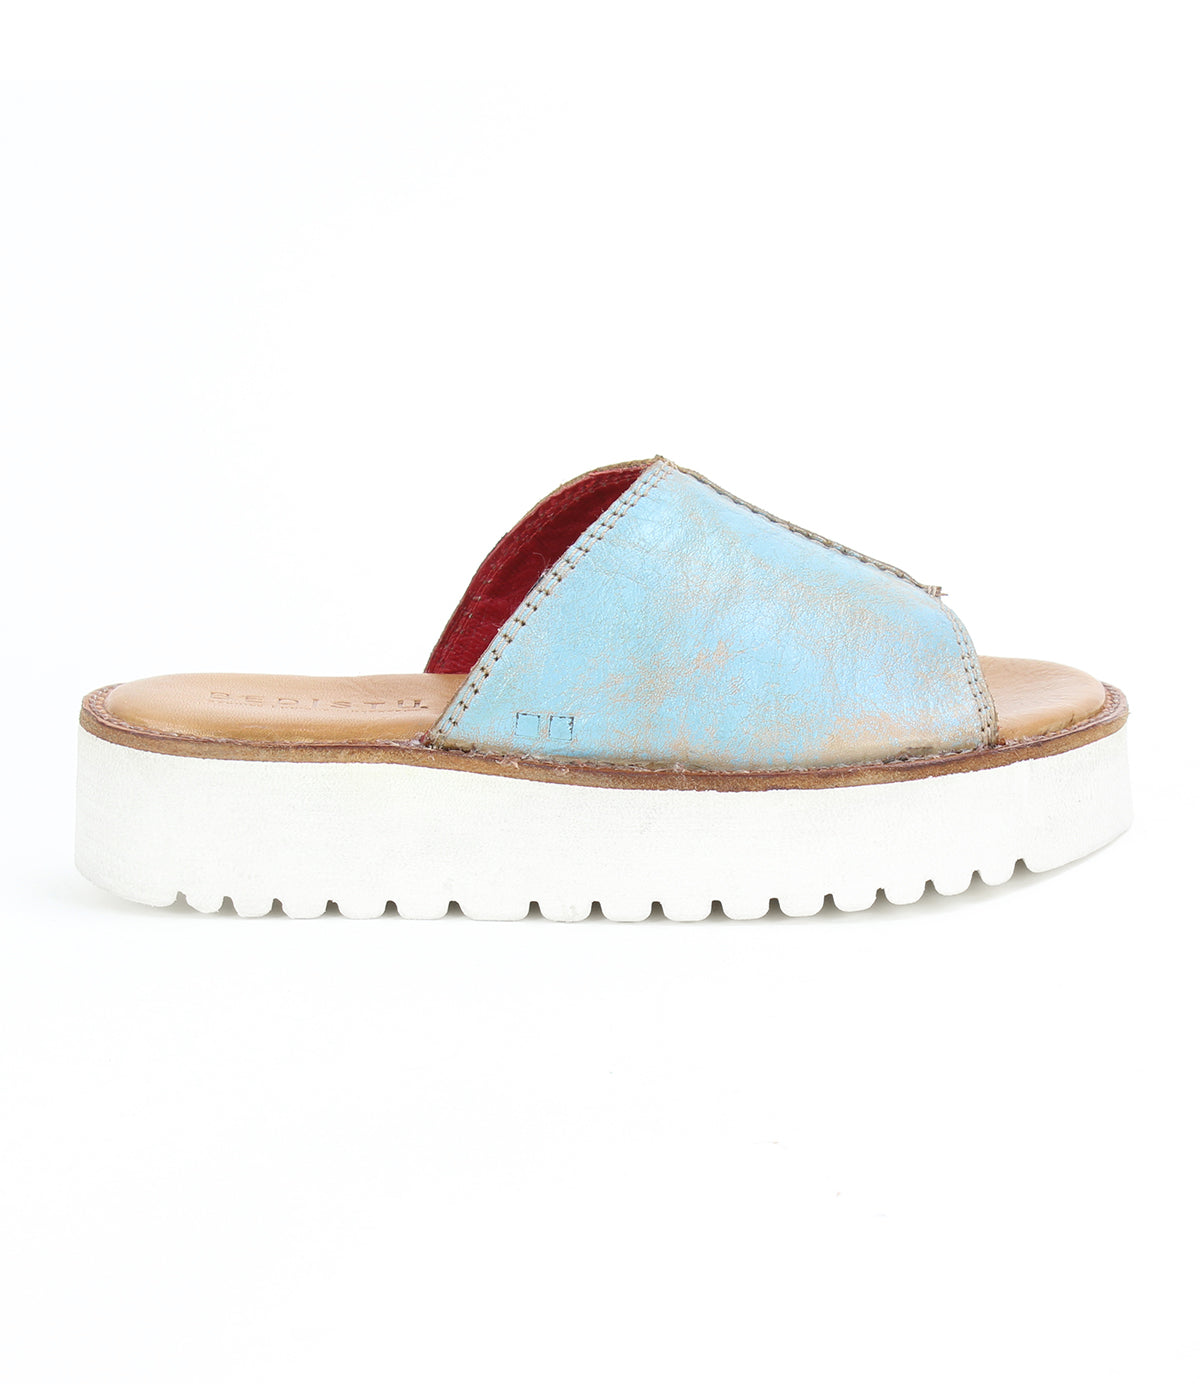 A comfortable Fairlee II leather slide sandal in a blue and white style by Bed Stu.